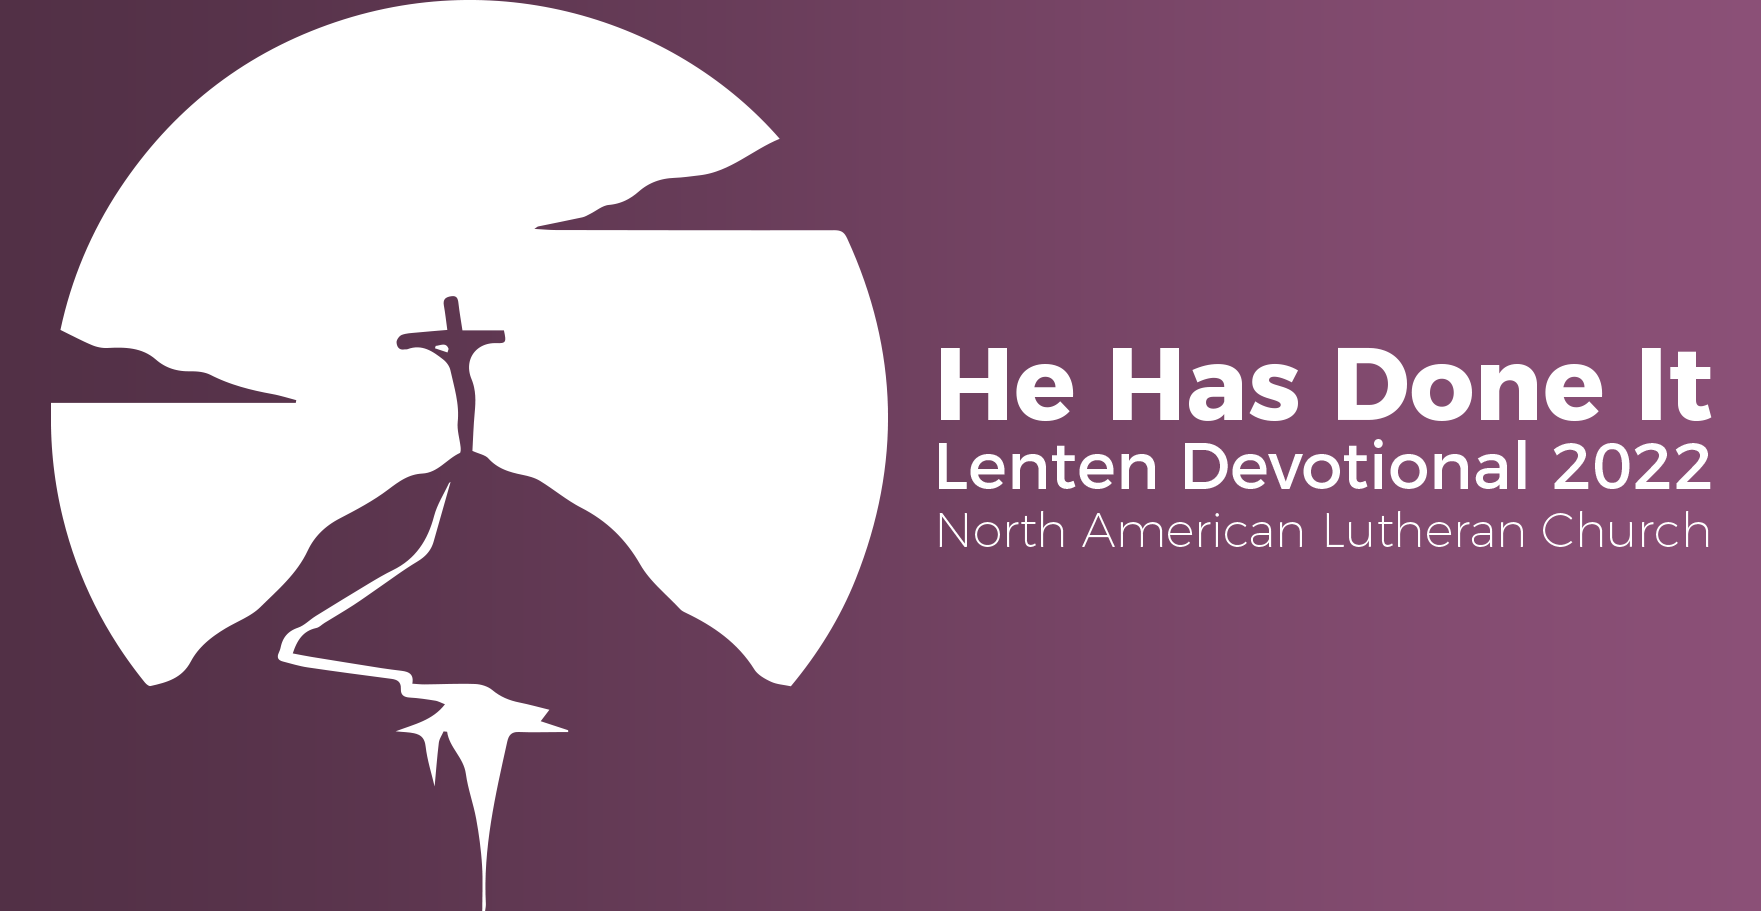 March 7, 2022 | Monday of the Week of Lent I